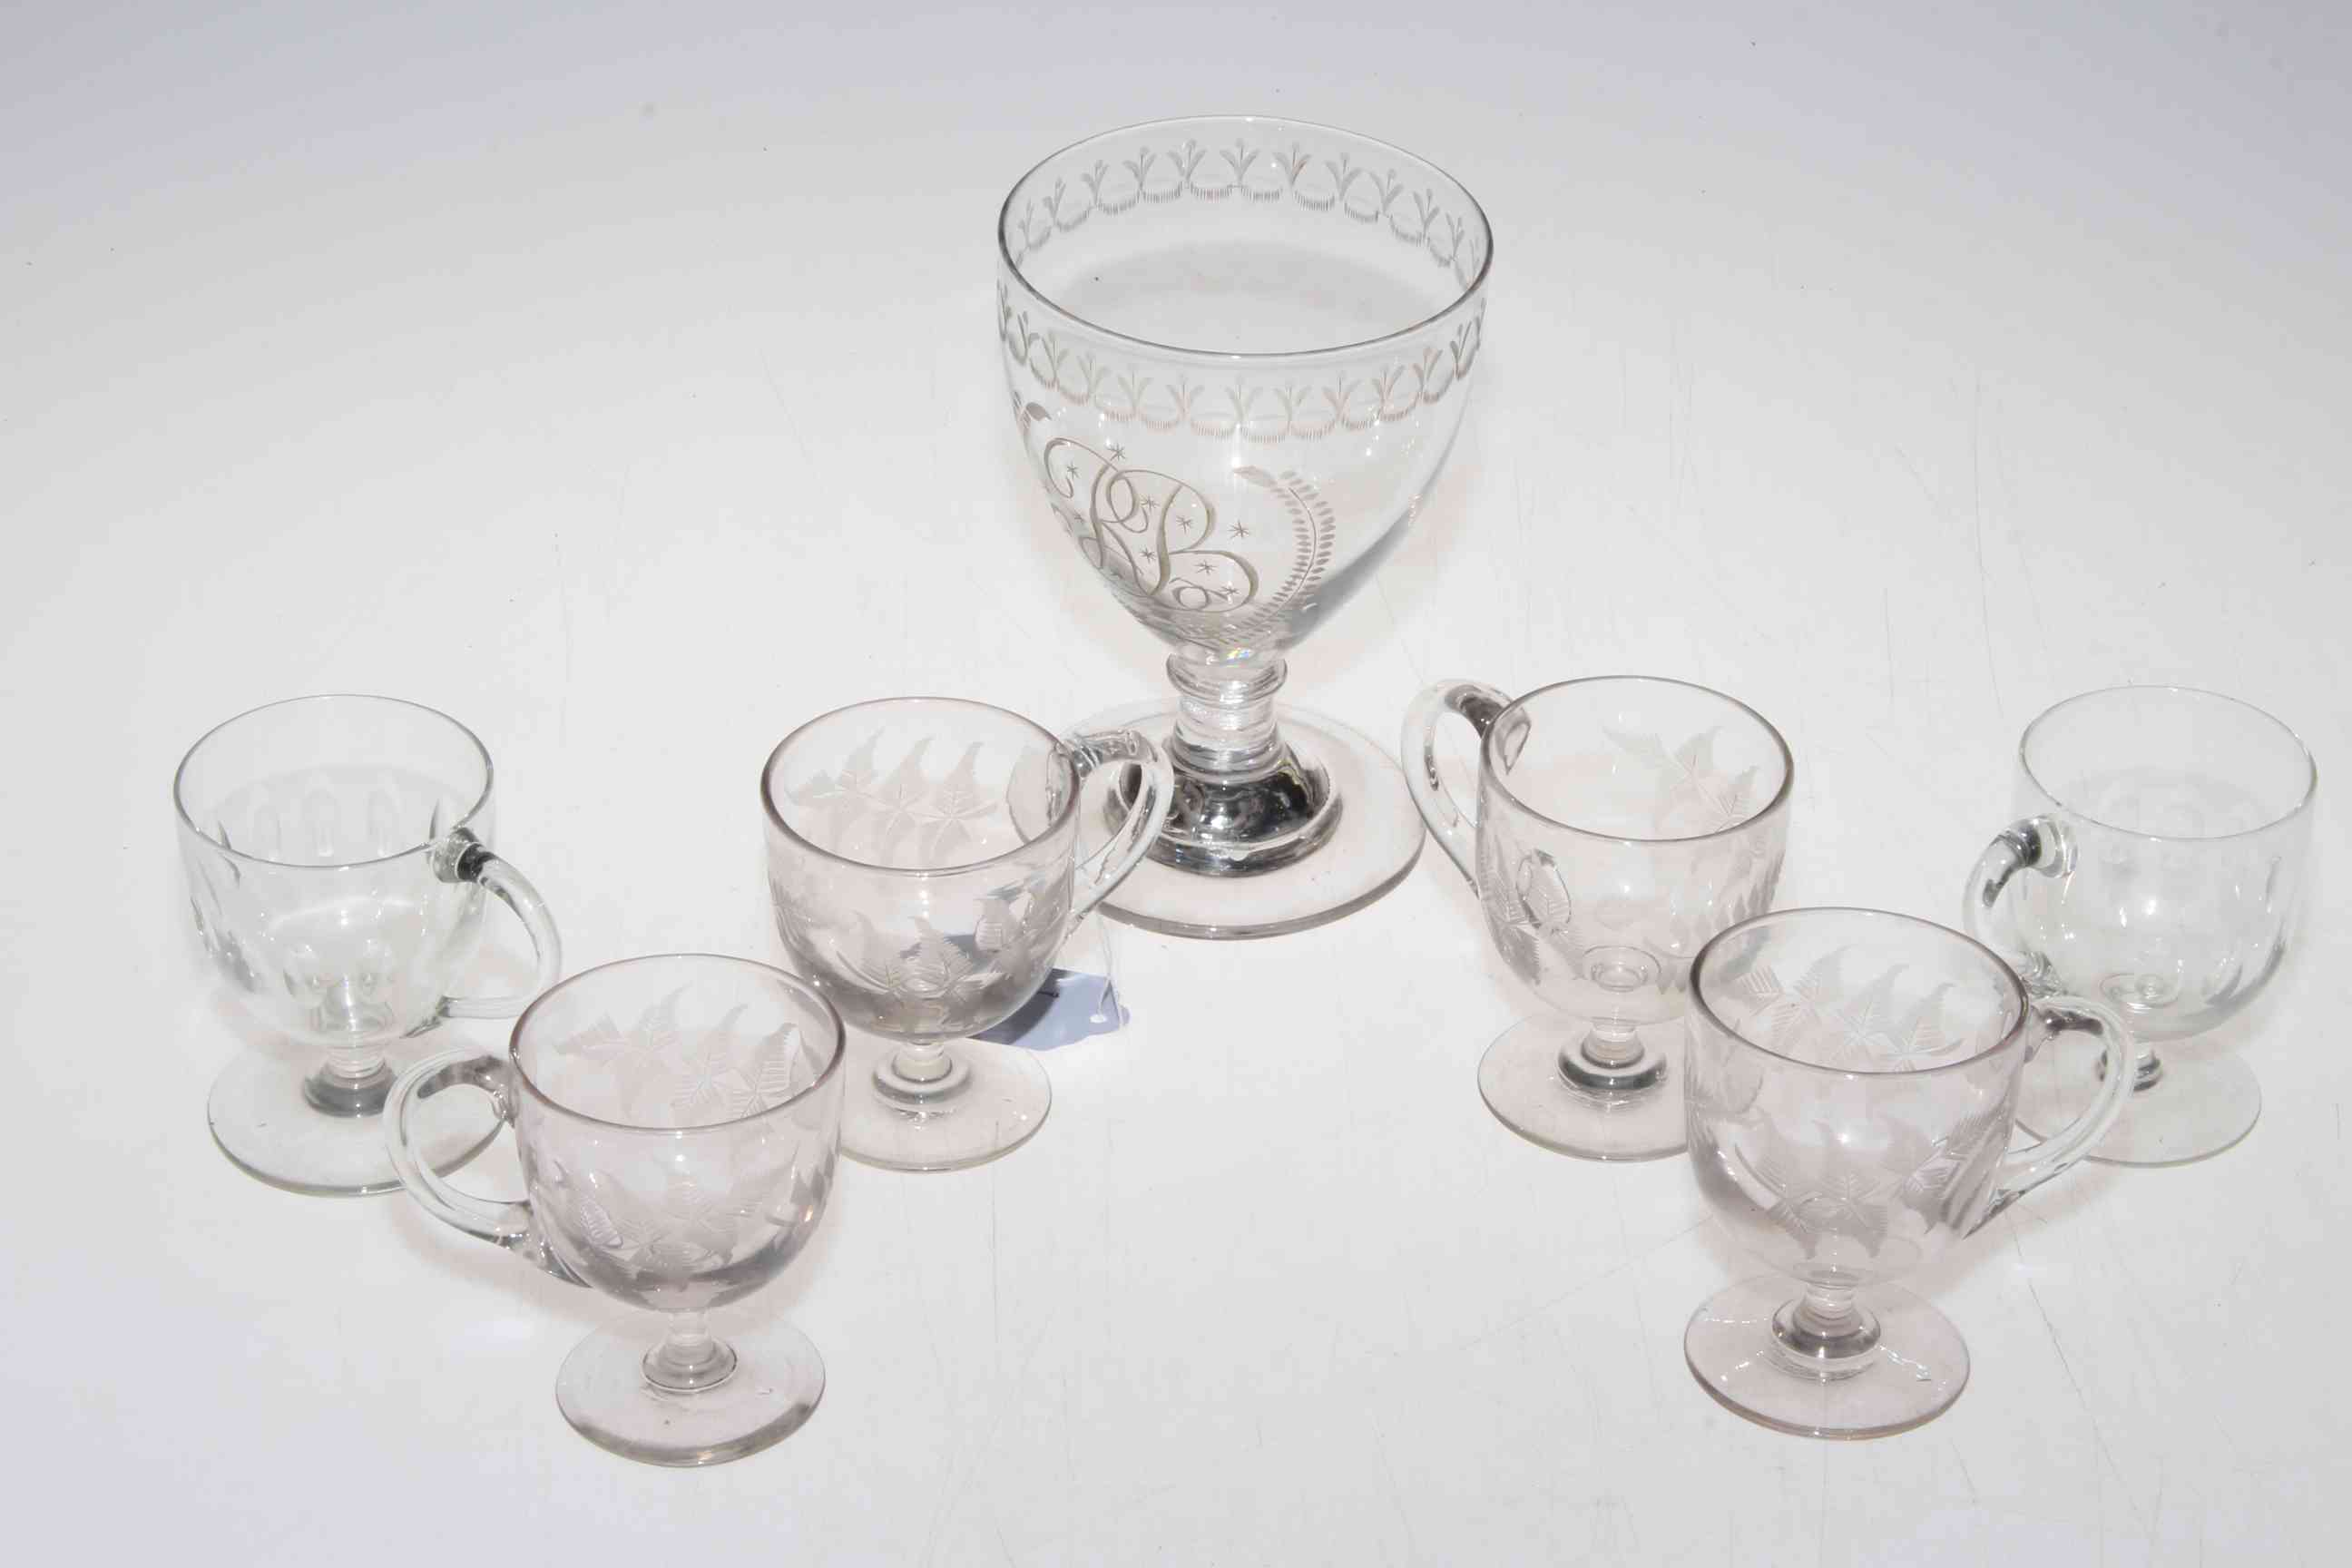 Georgian glass rummer with engraved decoration, together with six custard glasses.